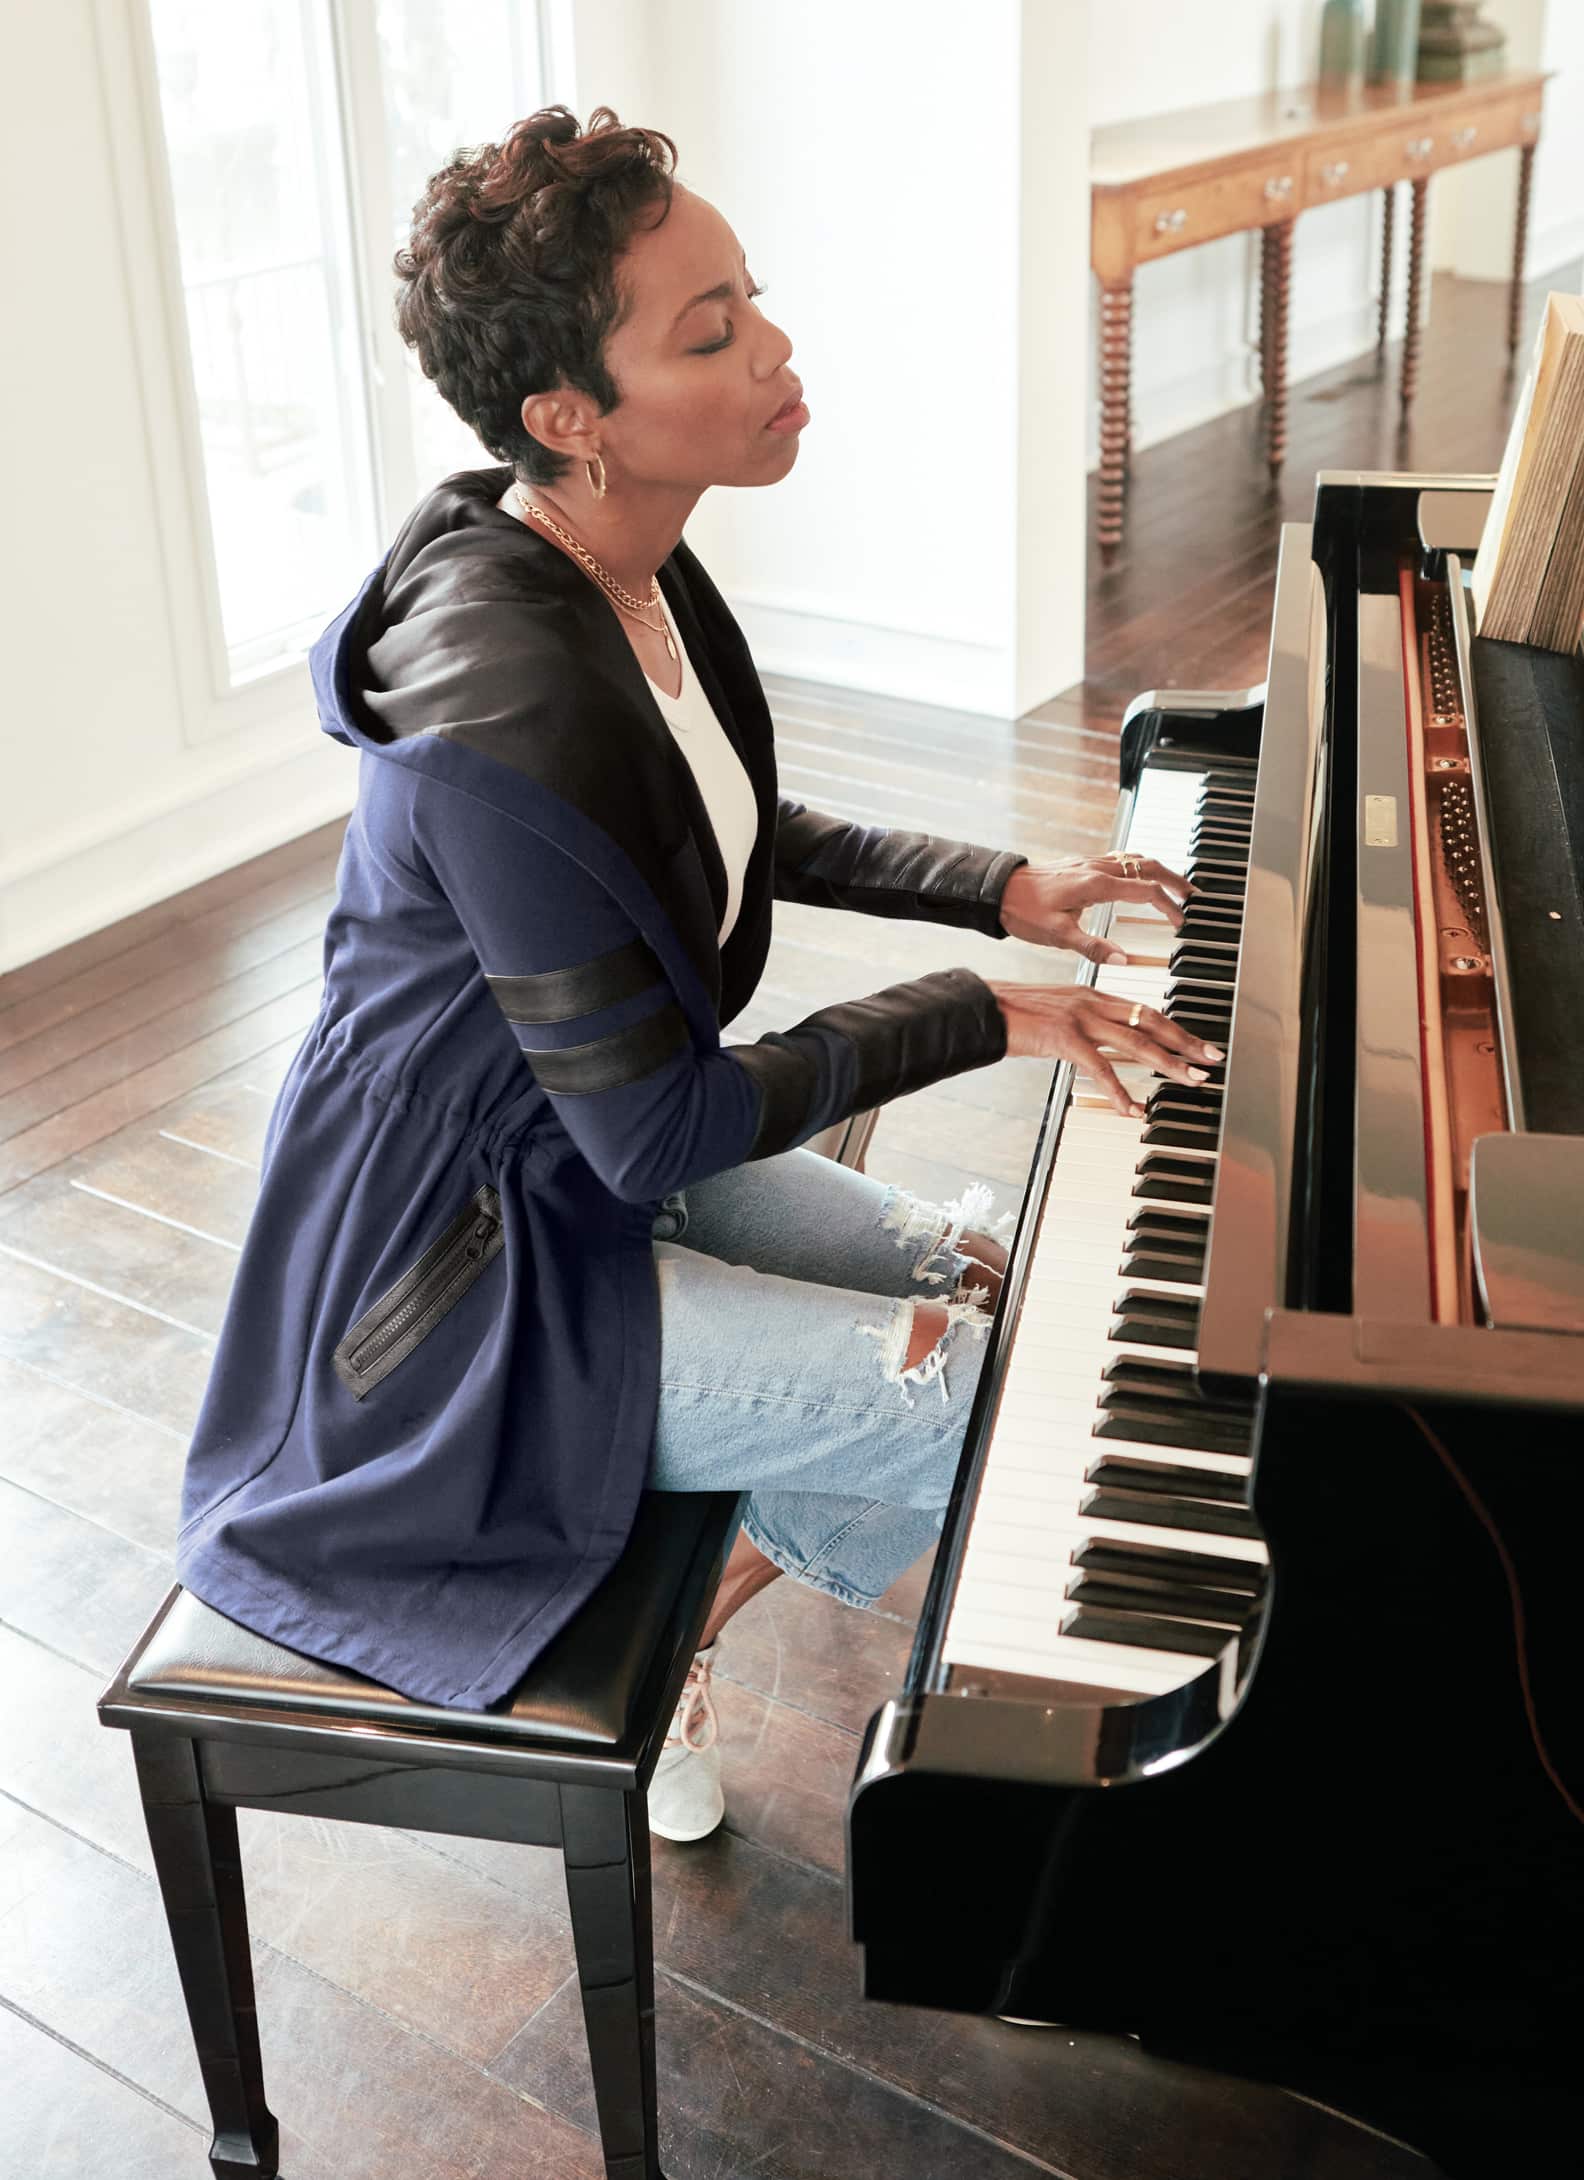 Woman at piano wearing jacket and jeans